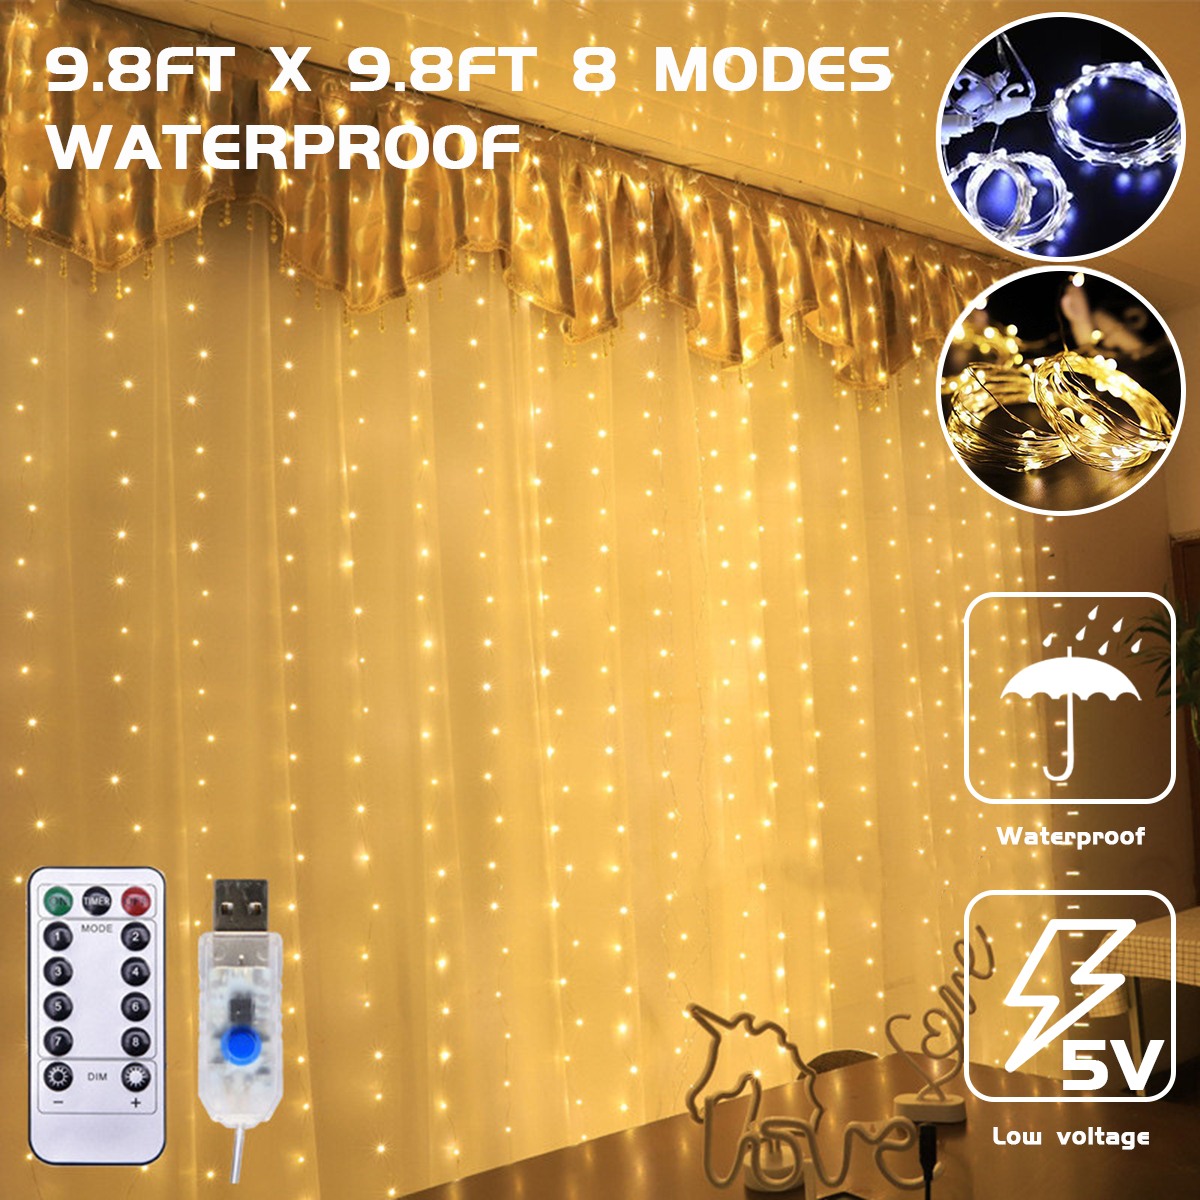 33m-300LED-USB-Waterproof-LED-Window-Curtain-String-Lights-Remote-Control-8-Modes-Fairy-Lights-Home--1745075-1